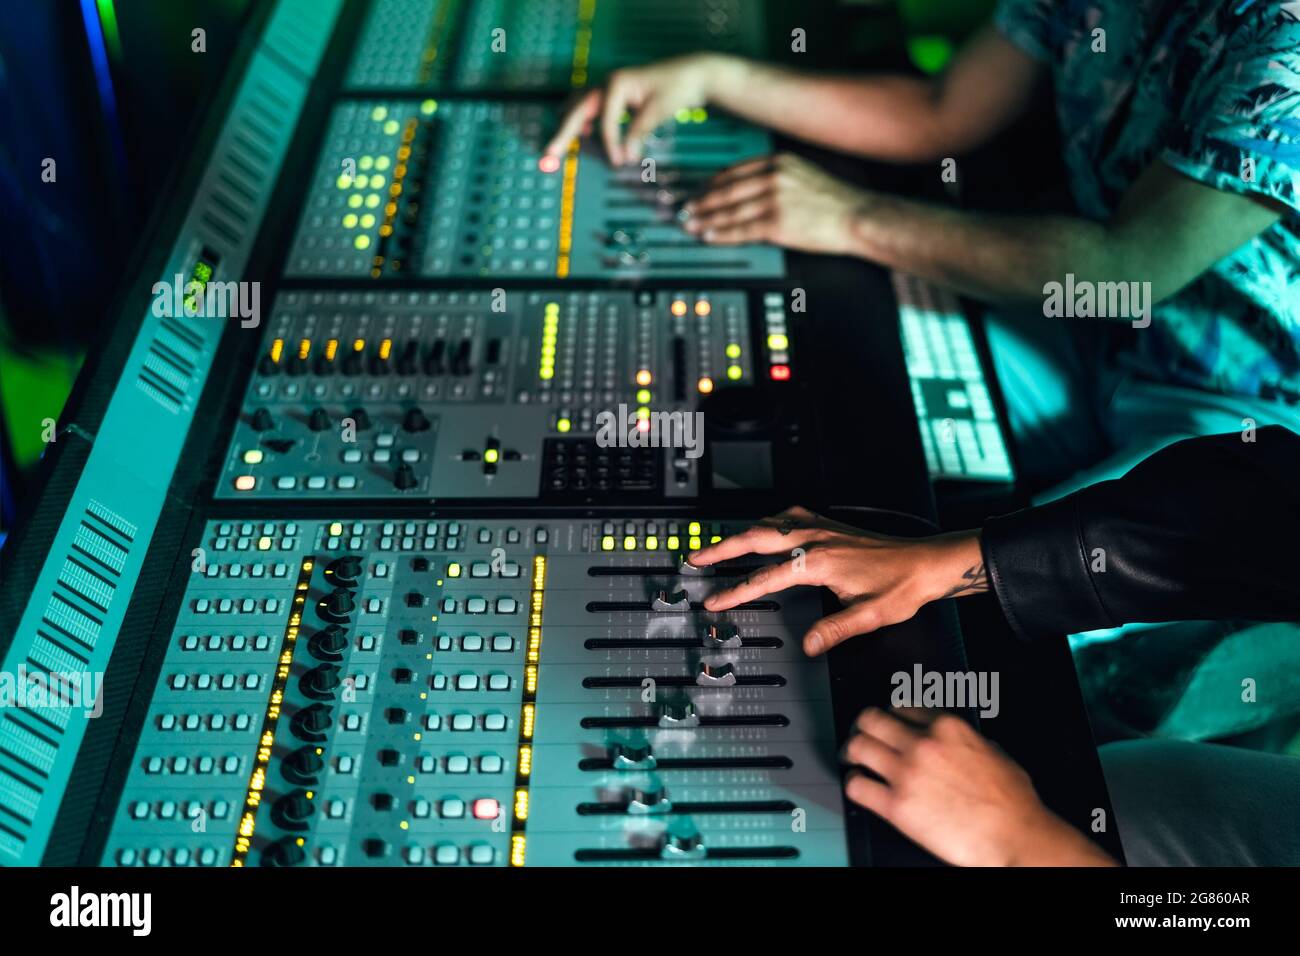 Close up audio engineer hands working with panel mixer control in music recording studio Stock Photo